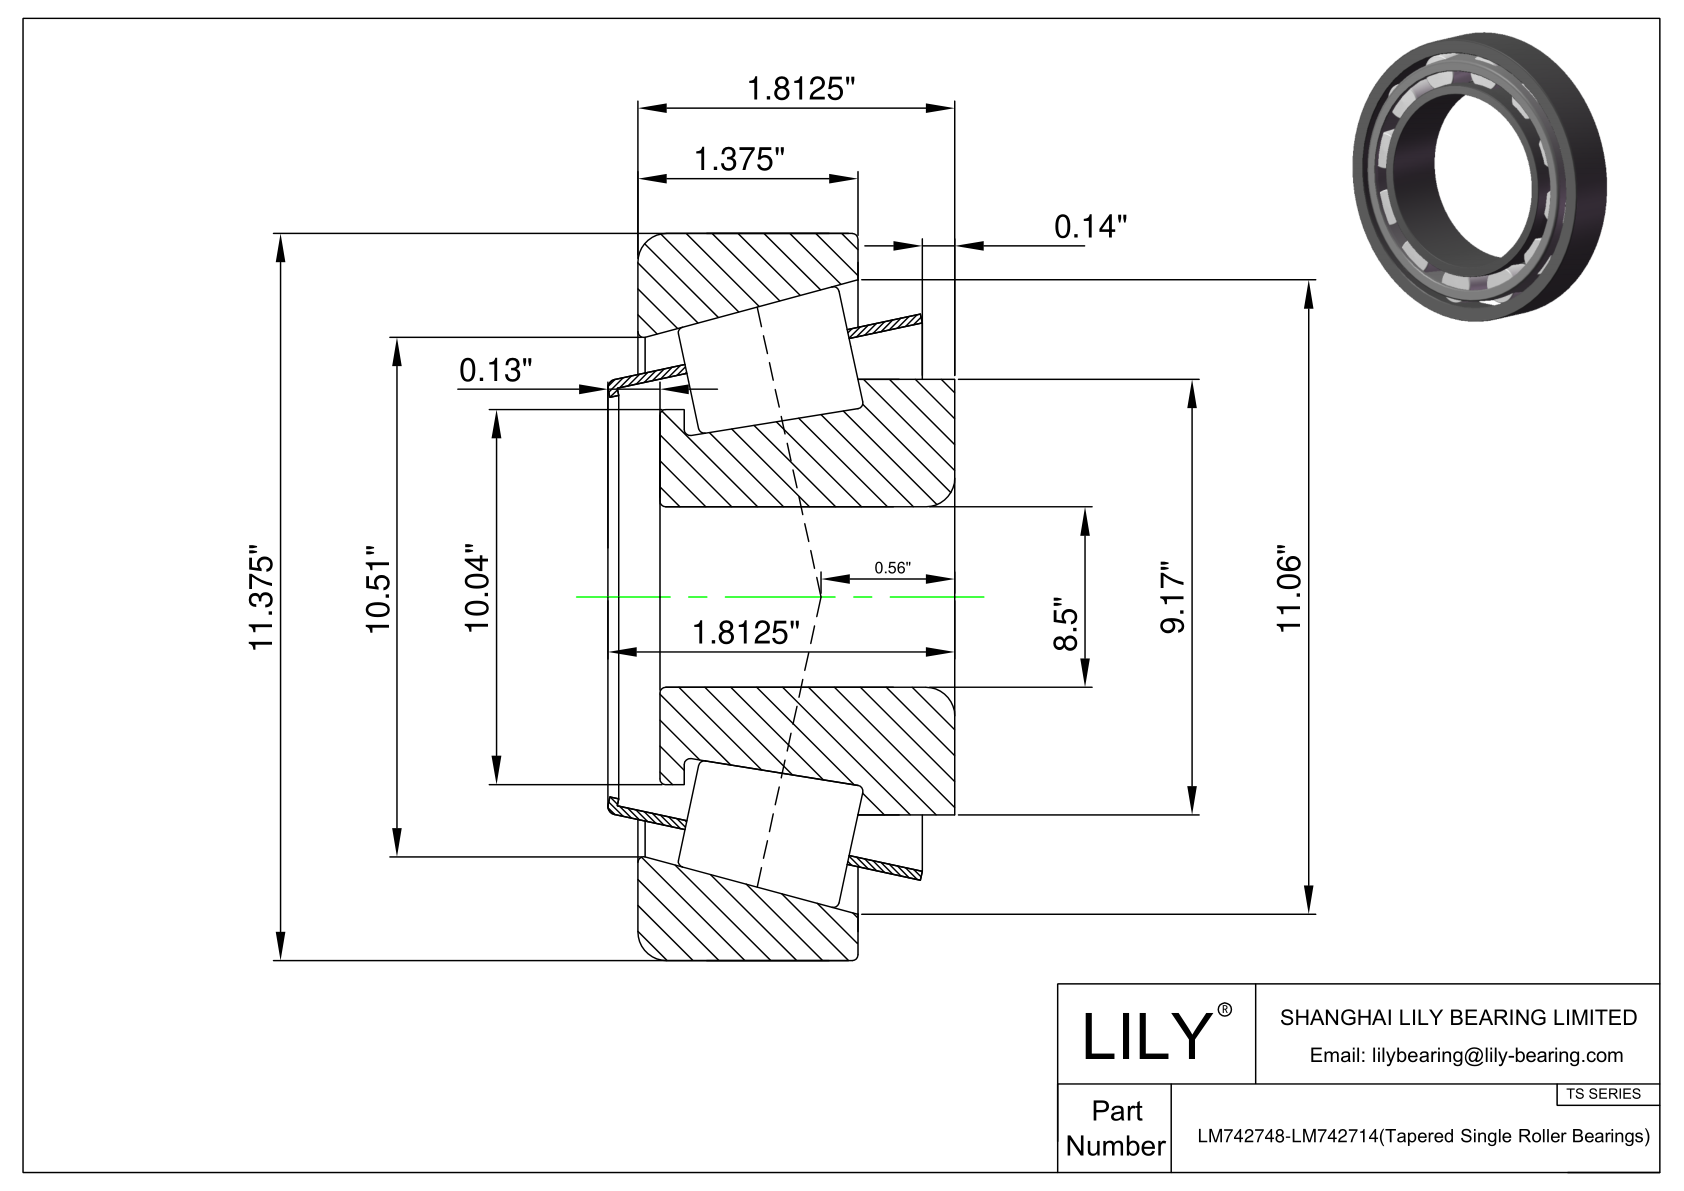 LM742748-LM742714 TS (Tapered Single Roller Bearings) (Imperial) cad drawing